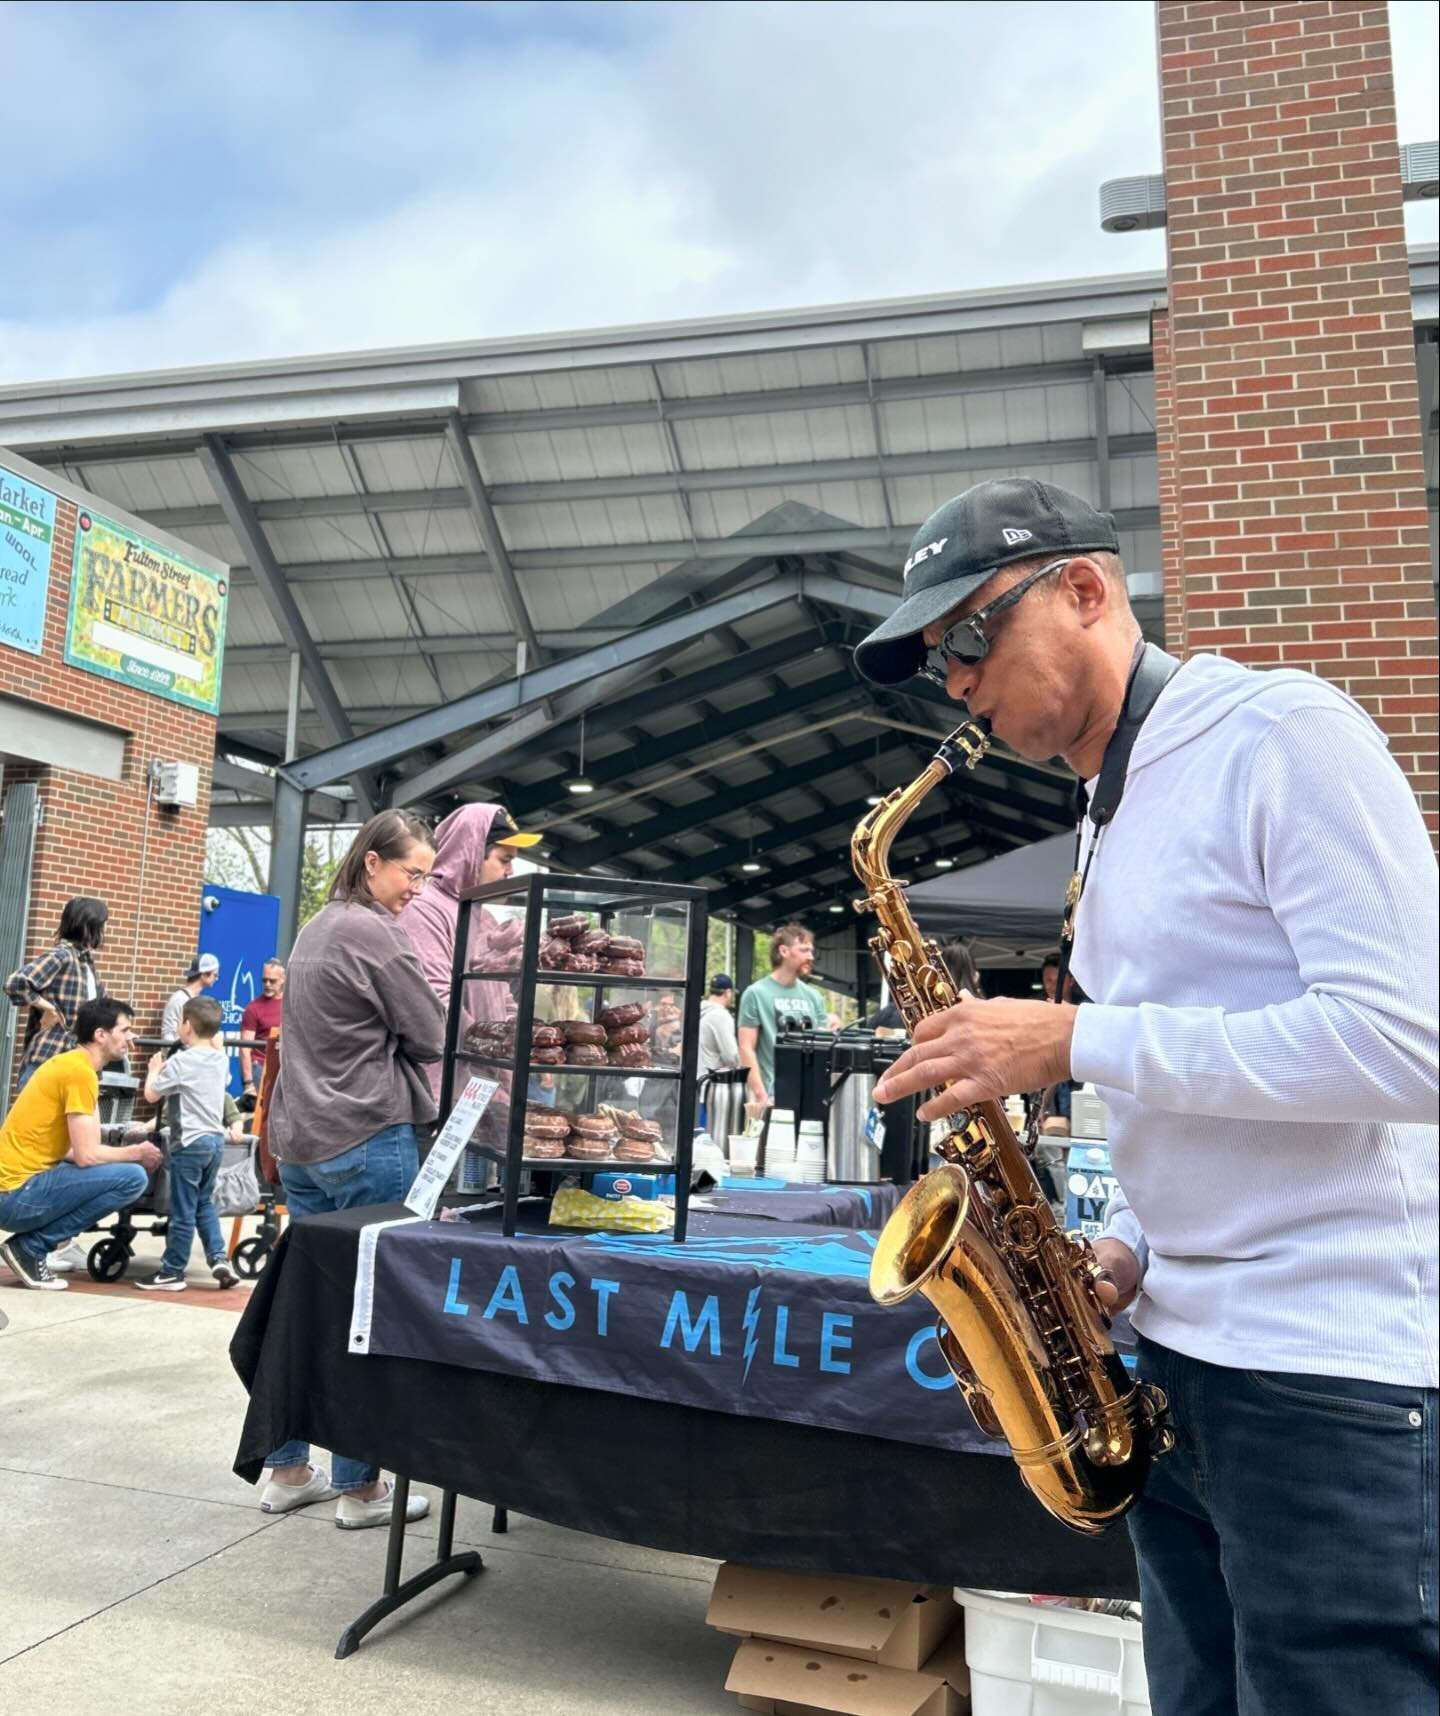 Hearing the sounds of a busy Market is music to our ears!🥹💐🎼

Thank you all for joining us on Opening Day!

Starting this week, we&rsquo;ll be open every Wednesday, Friday, and Saturday from 8 AM to 2 PM until the end of October!